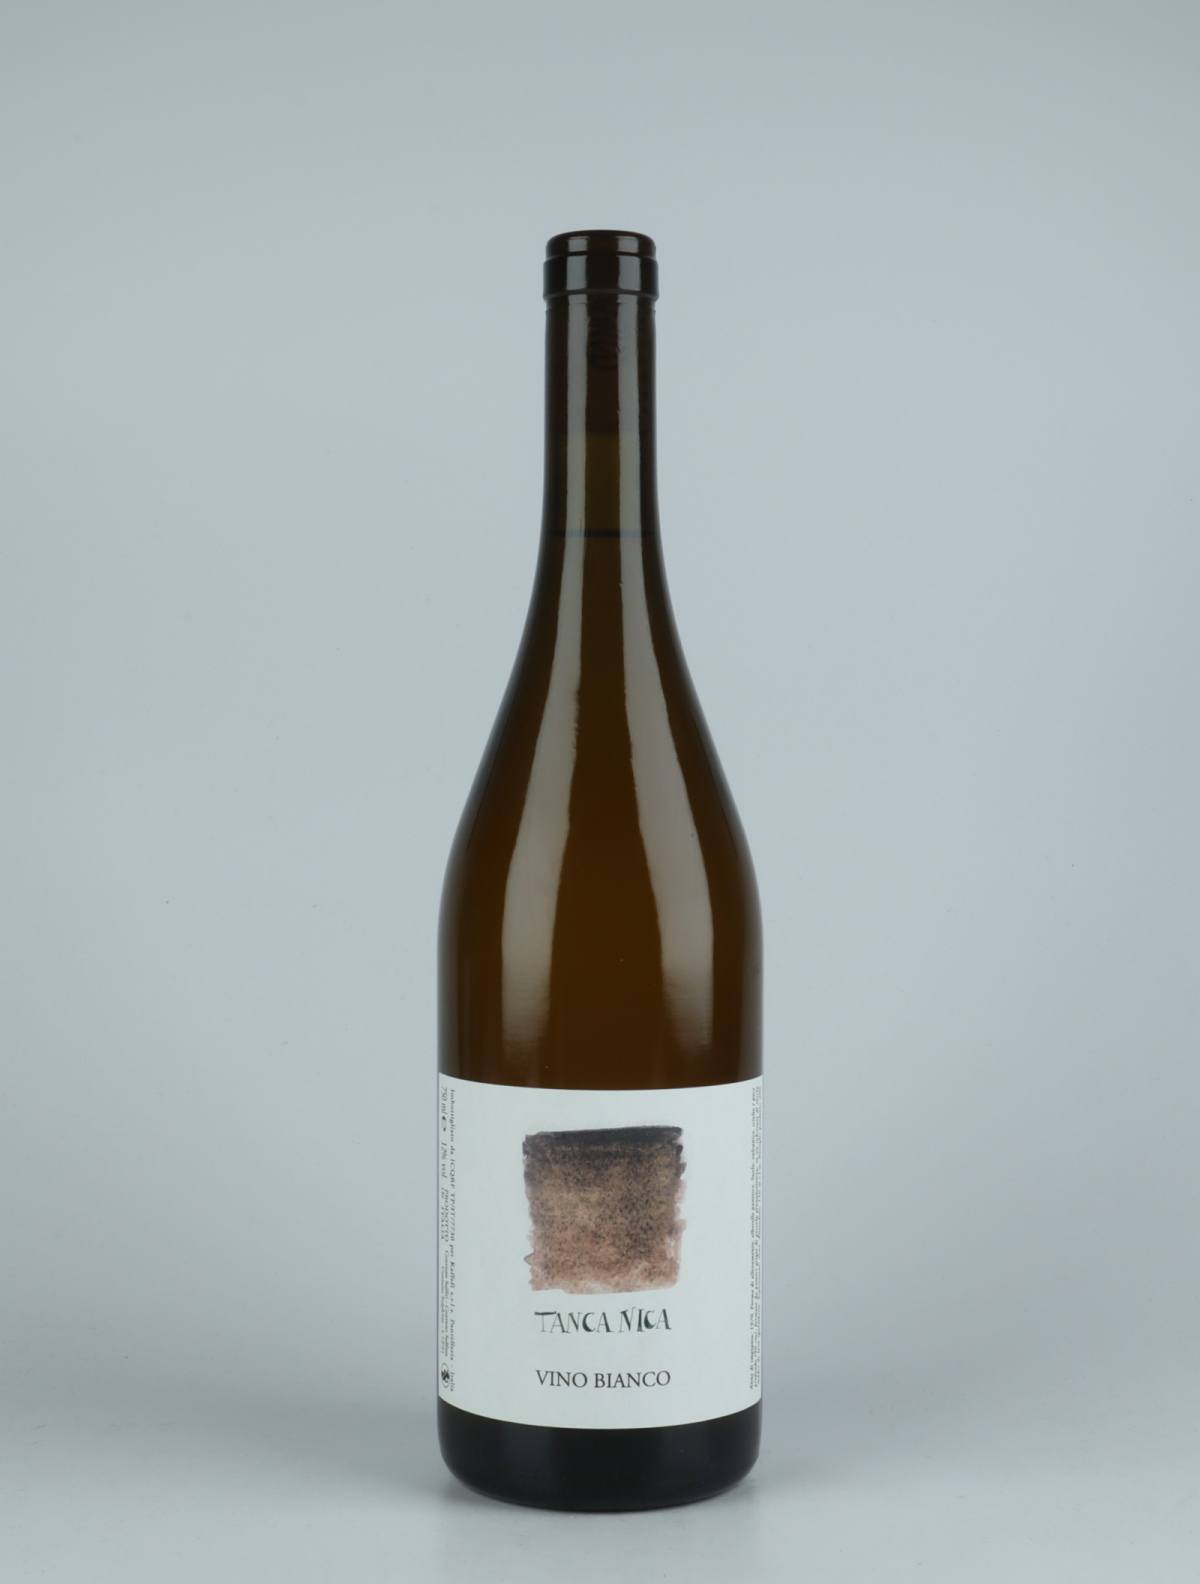 A bottle 2020 Tanca Nica 2 (Black label) White wine from Tanca Nica, Sicily in Italy